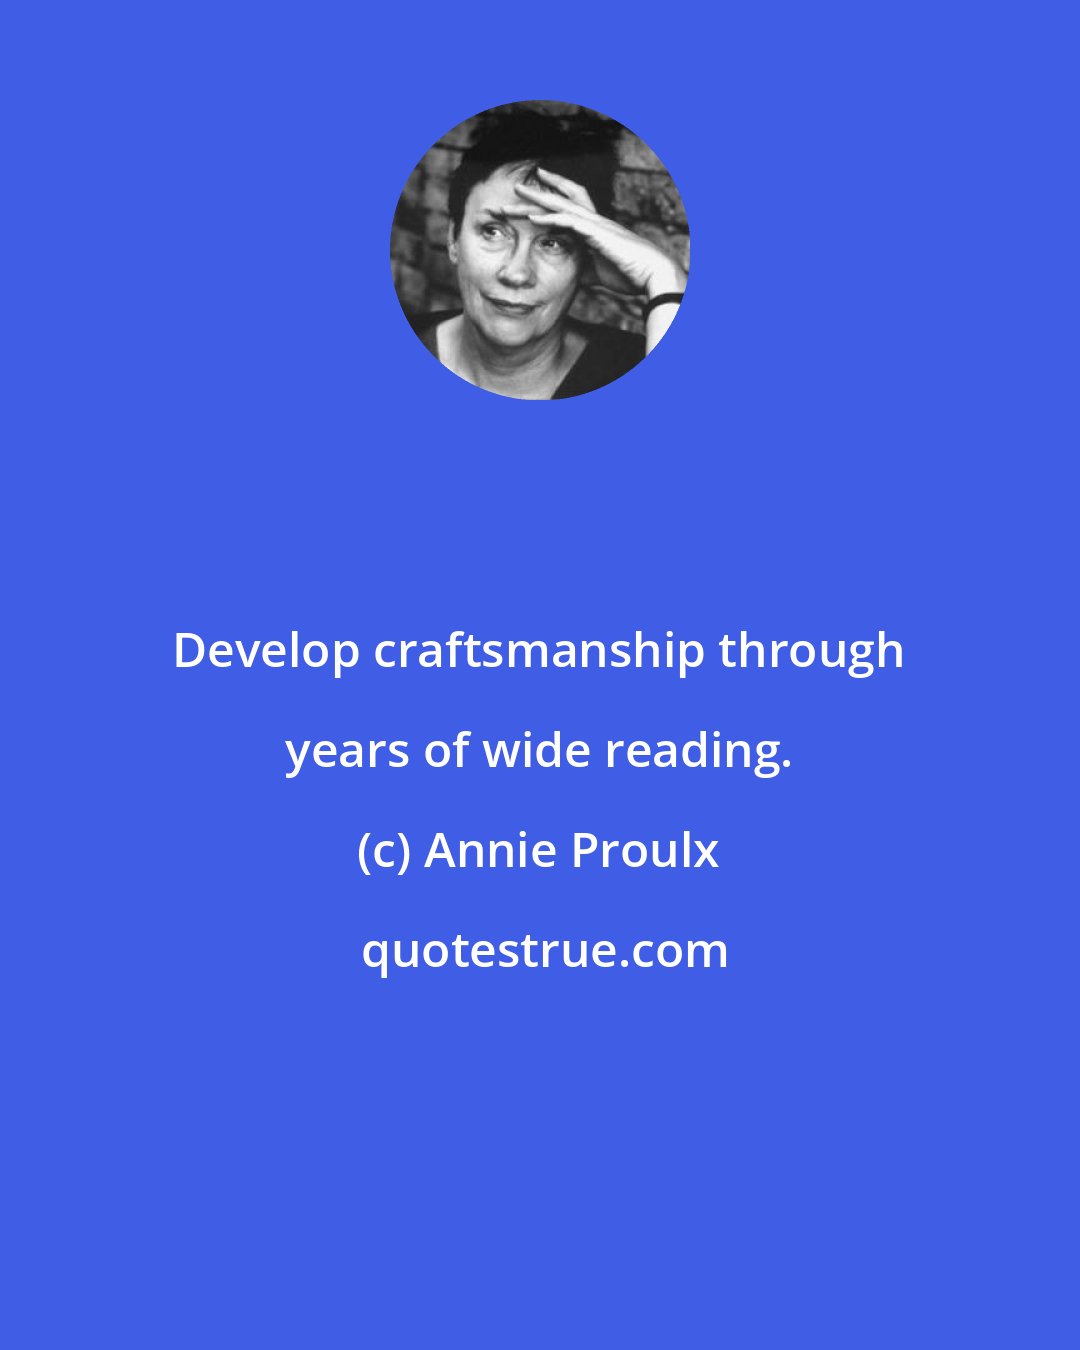 Annie Proulx: Develop craftsmanship through years of wide reading.